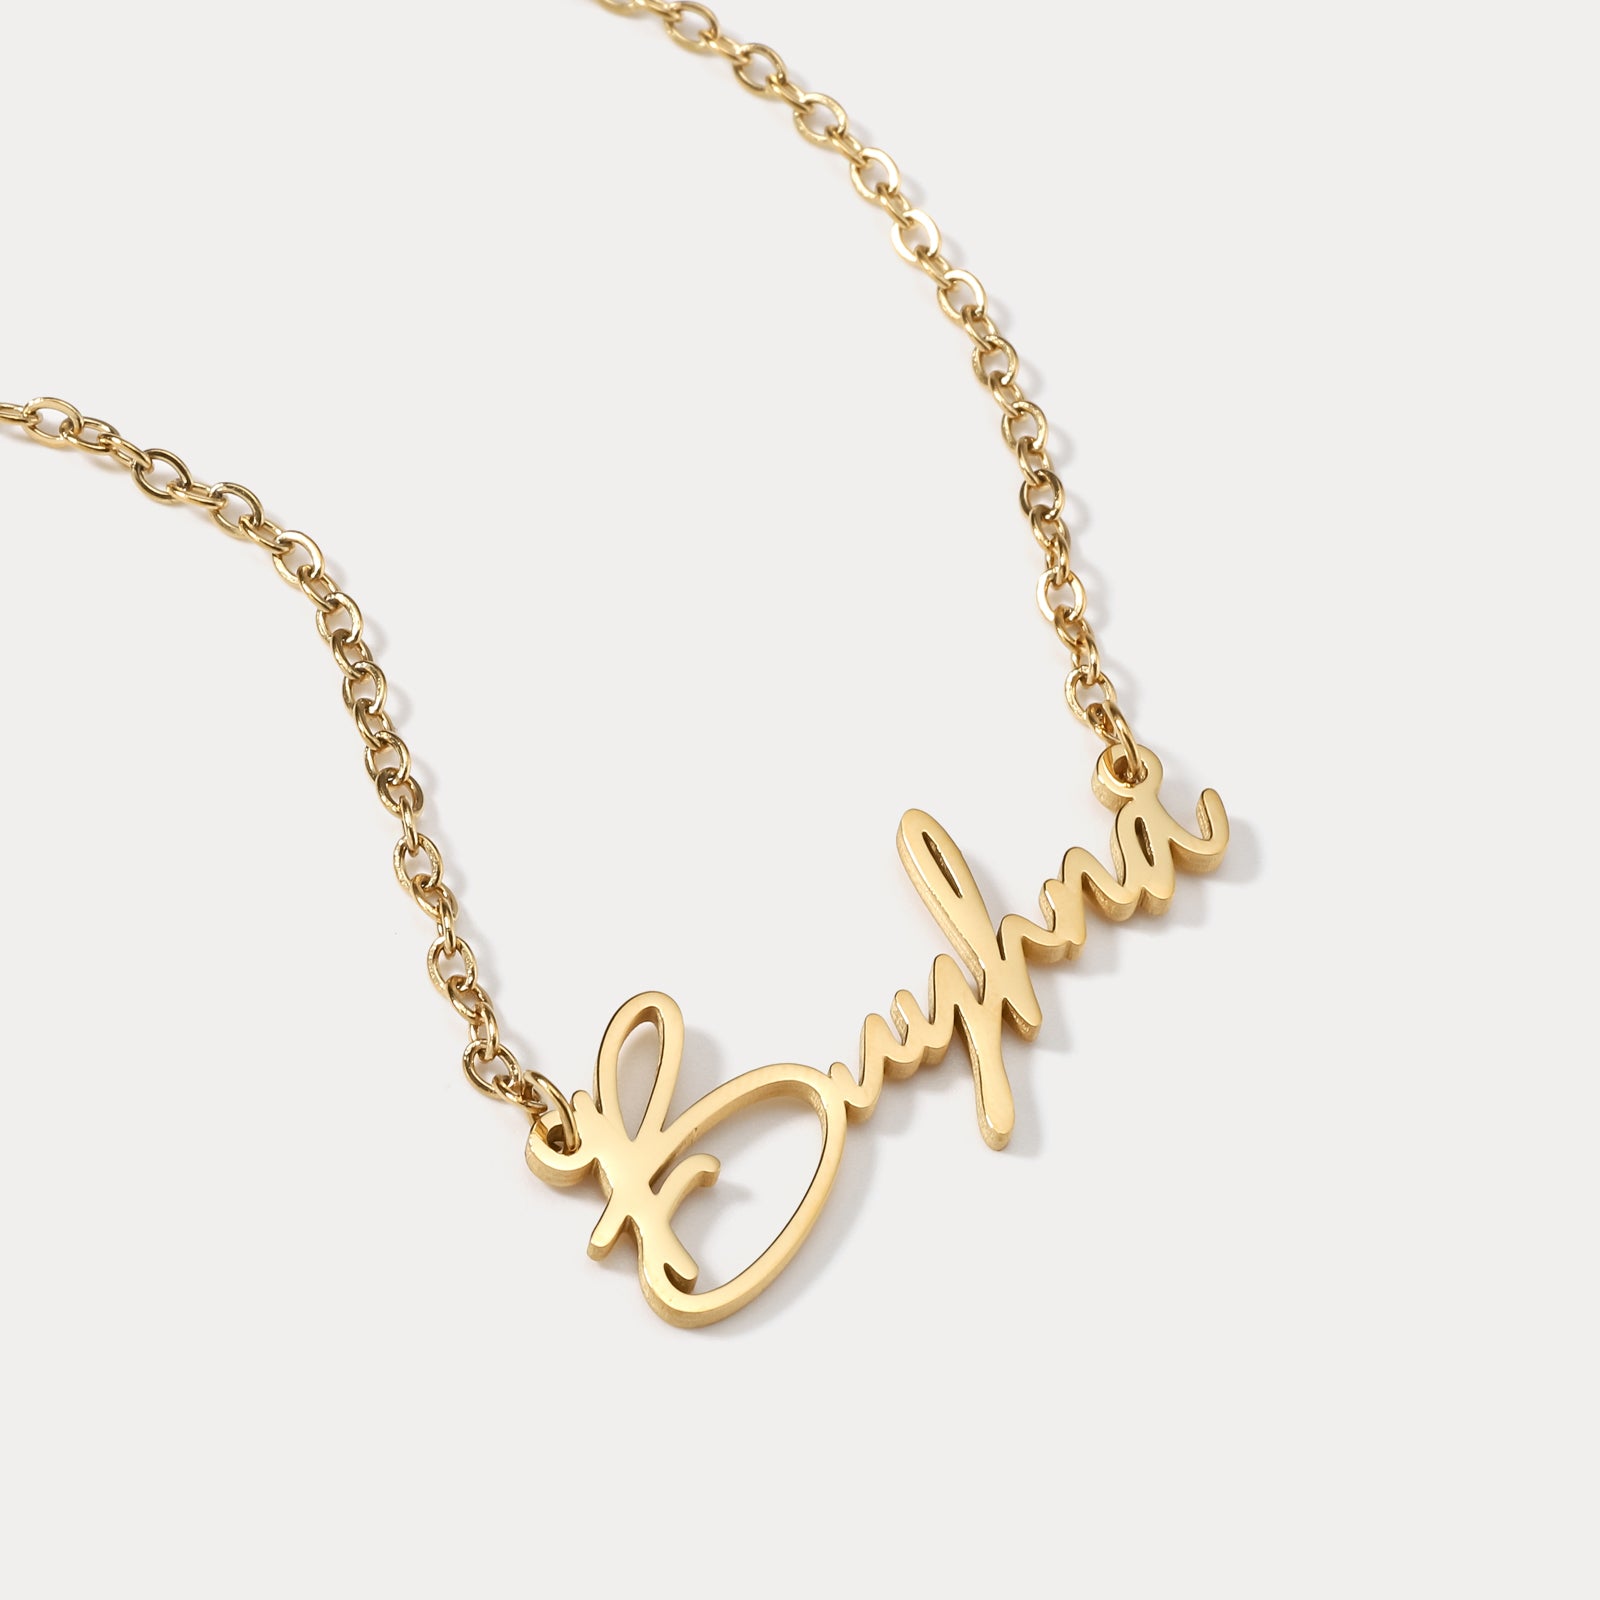 Personalized Nameplate Necklace